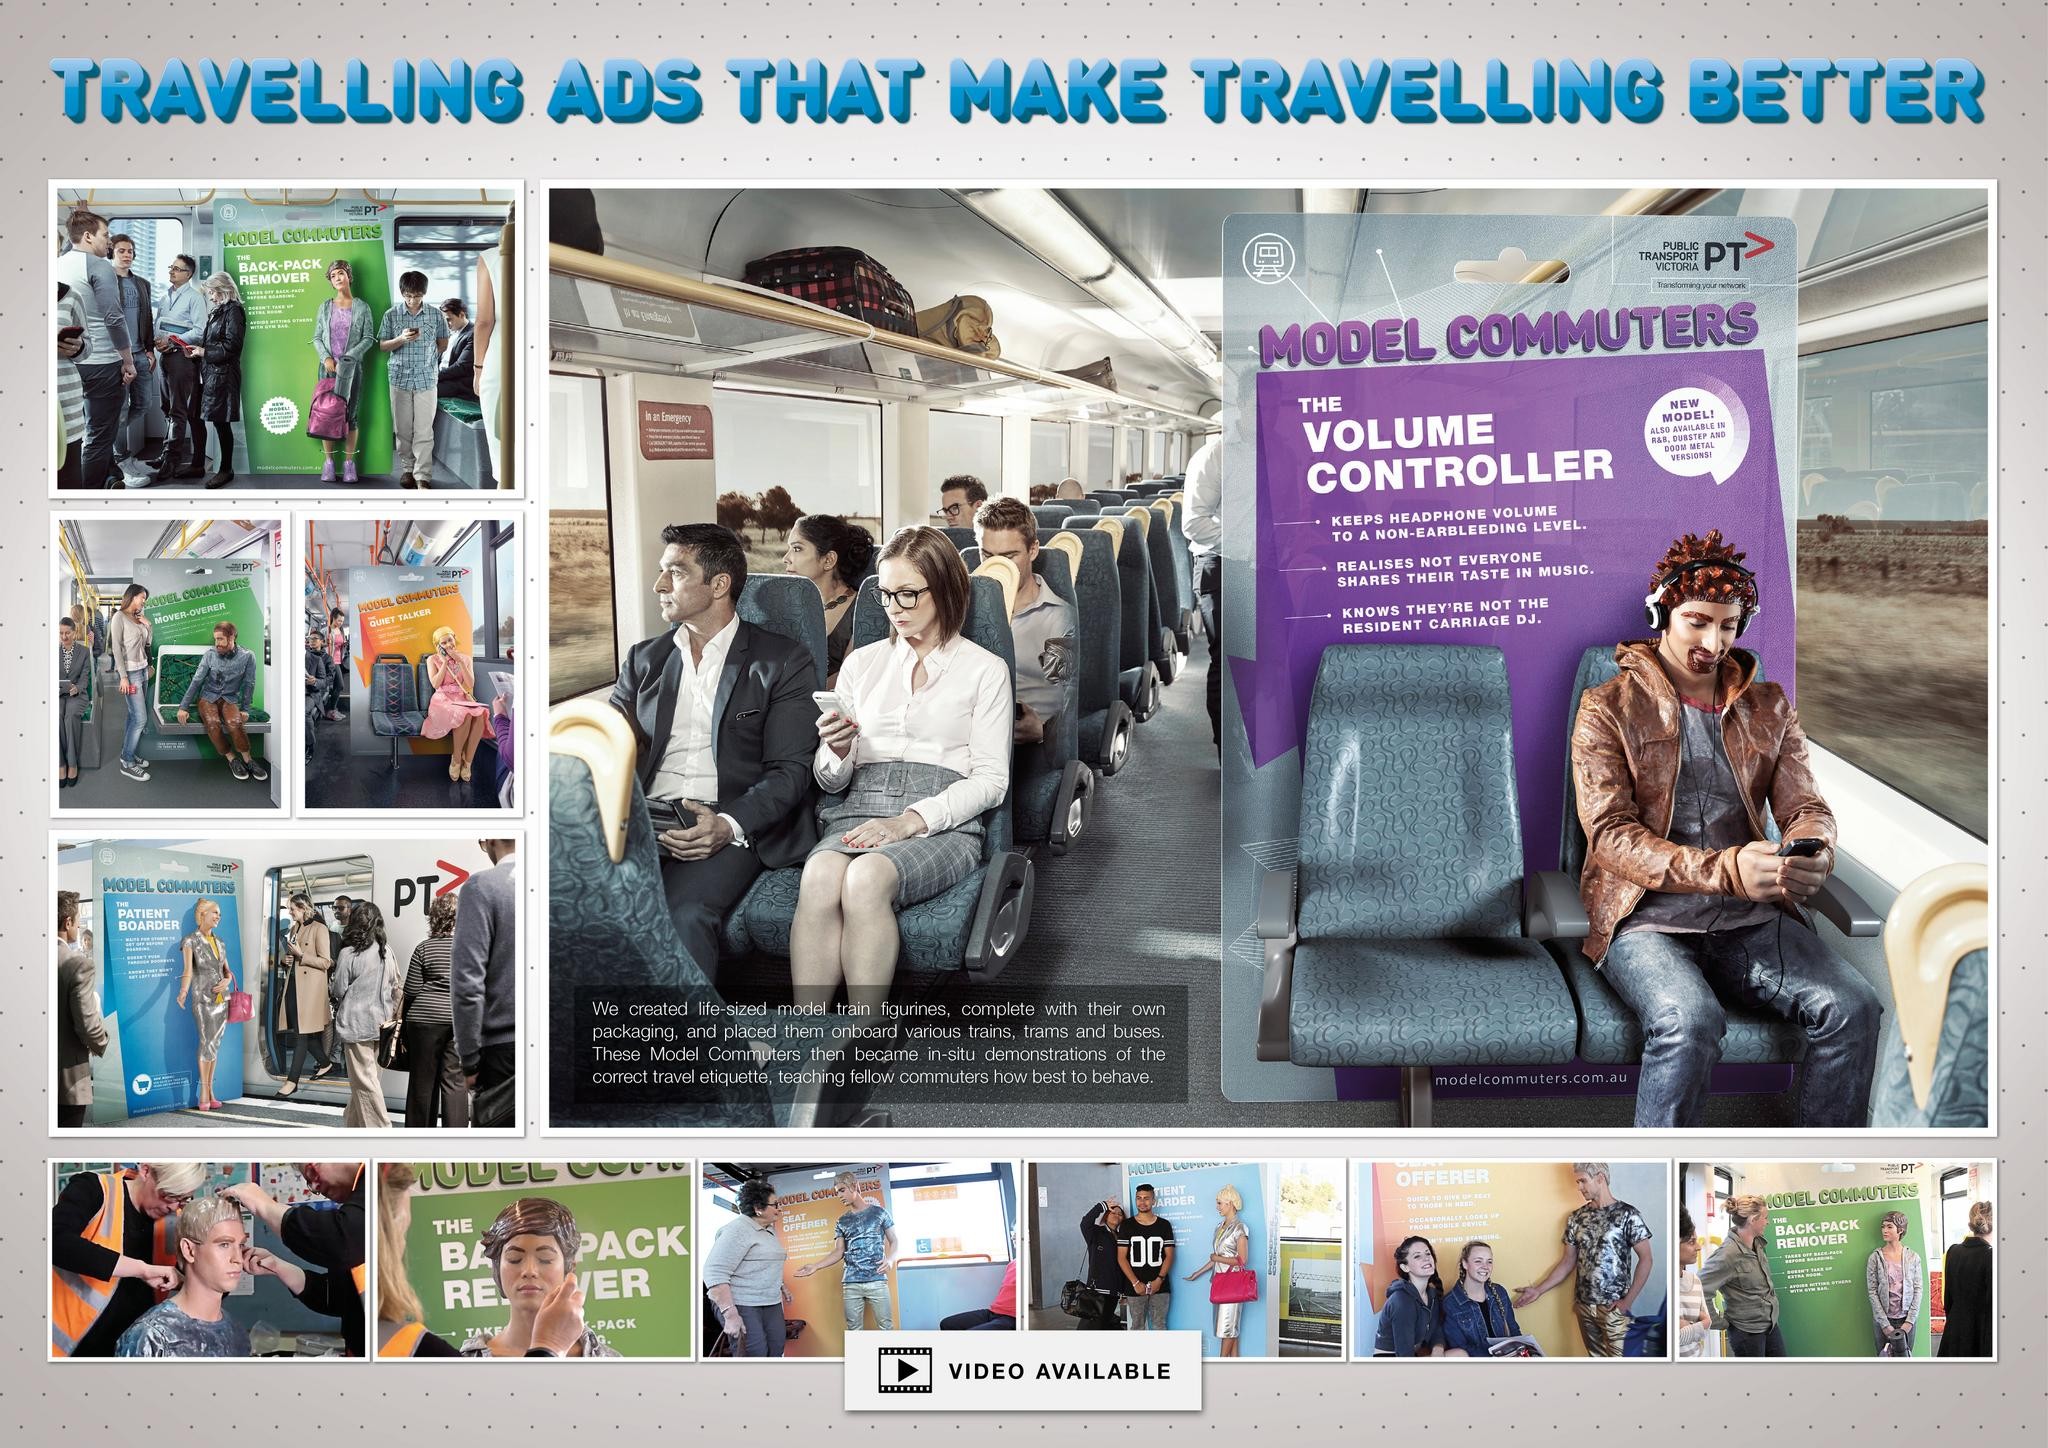 TRAVELLING ADS